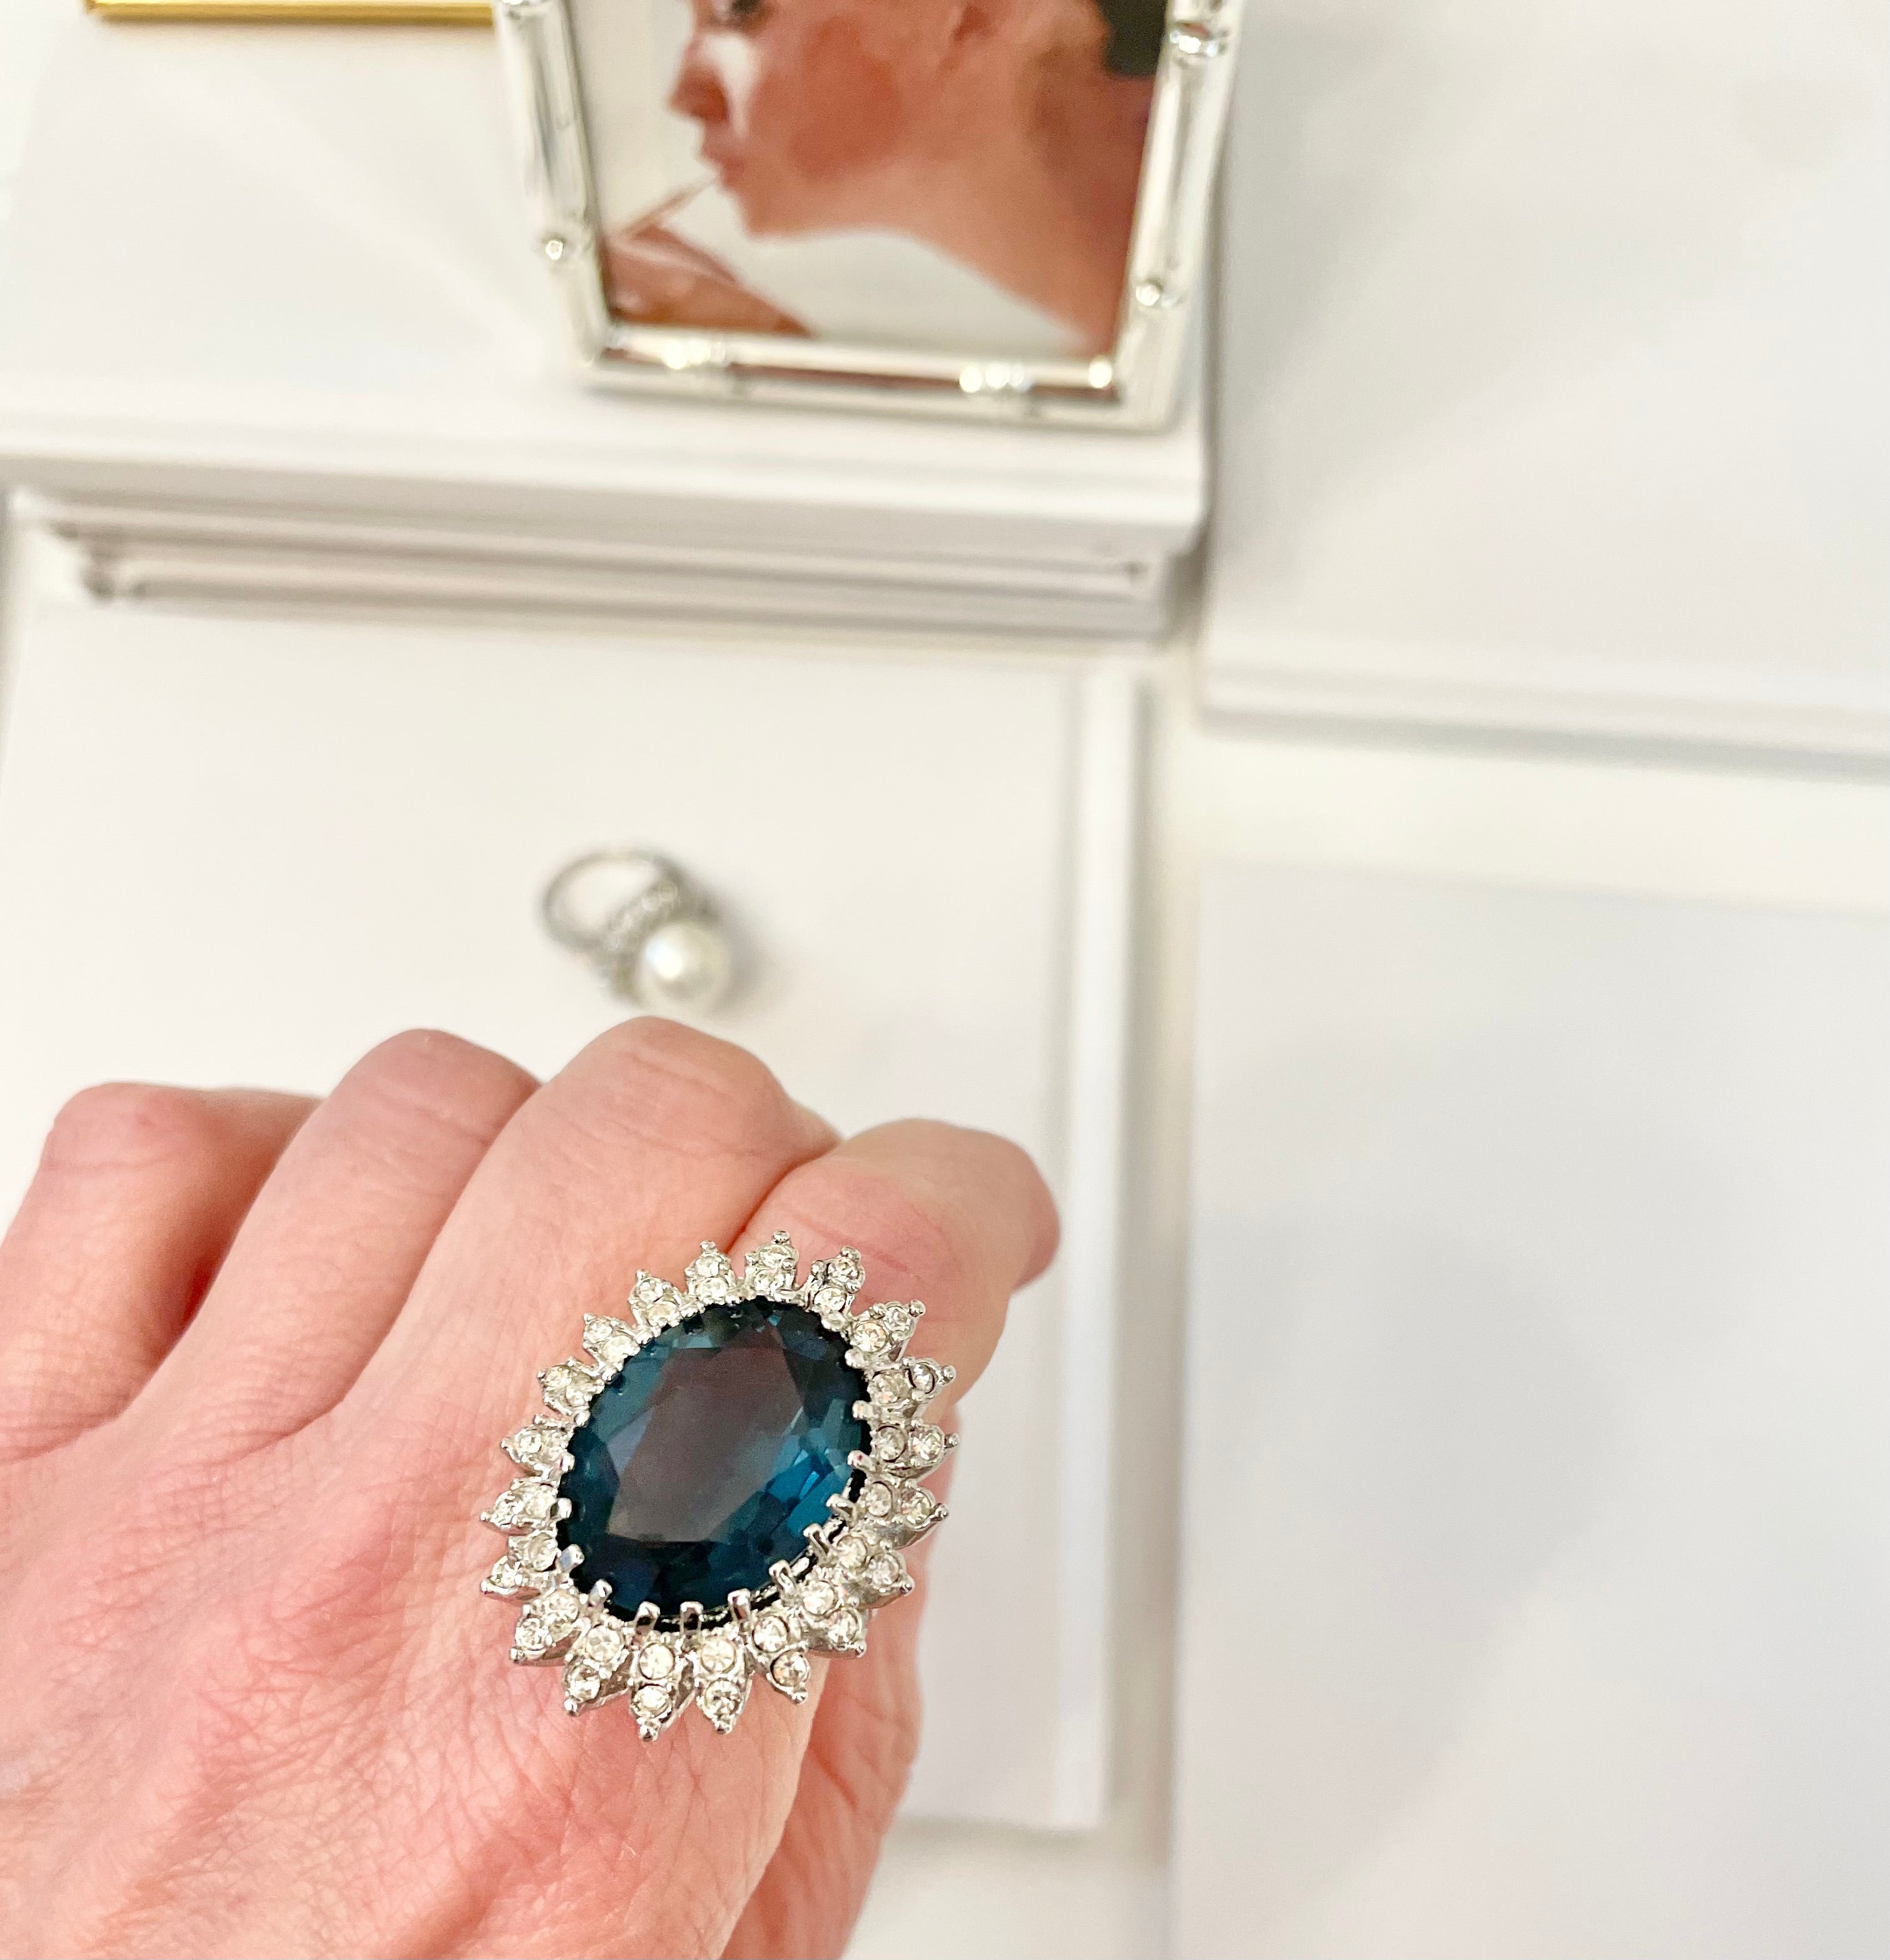 The Martini cocktail ring... a stunning sapphire glass delight!